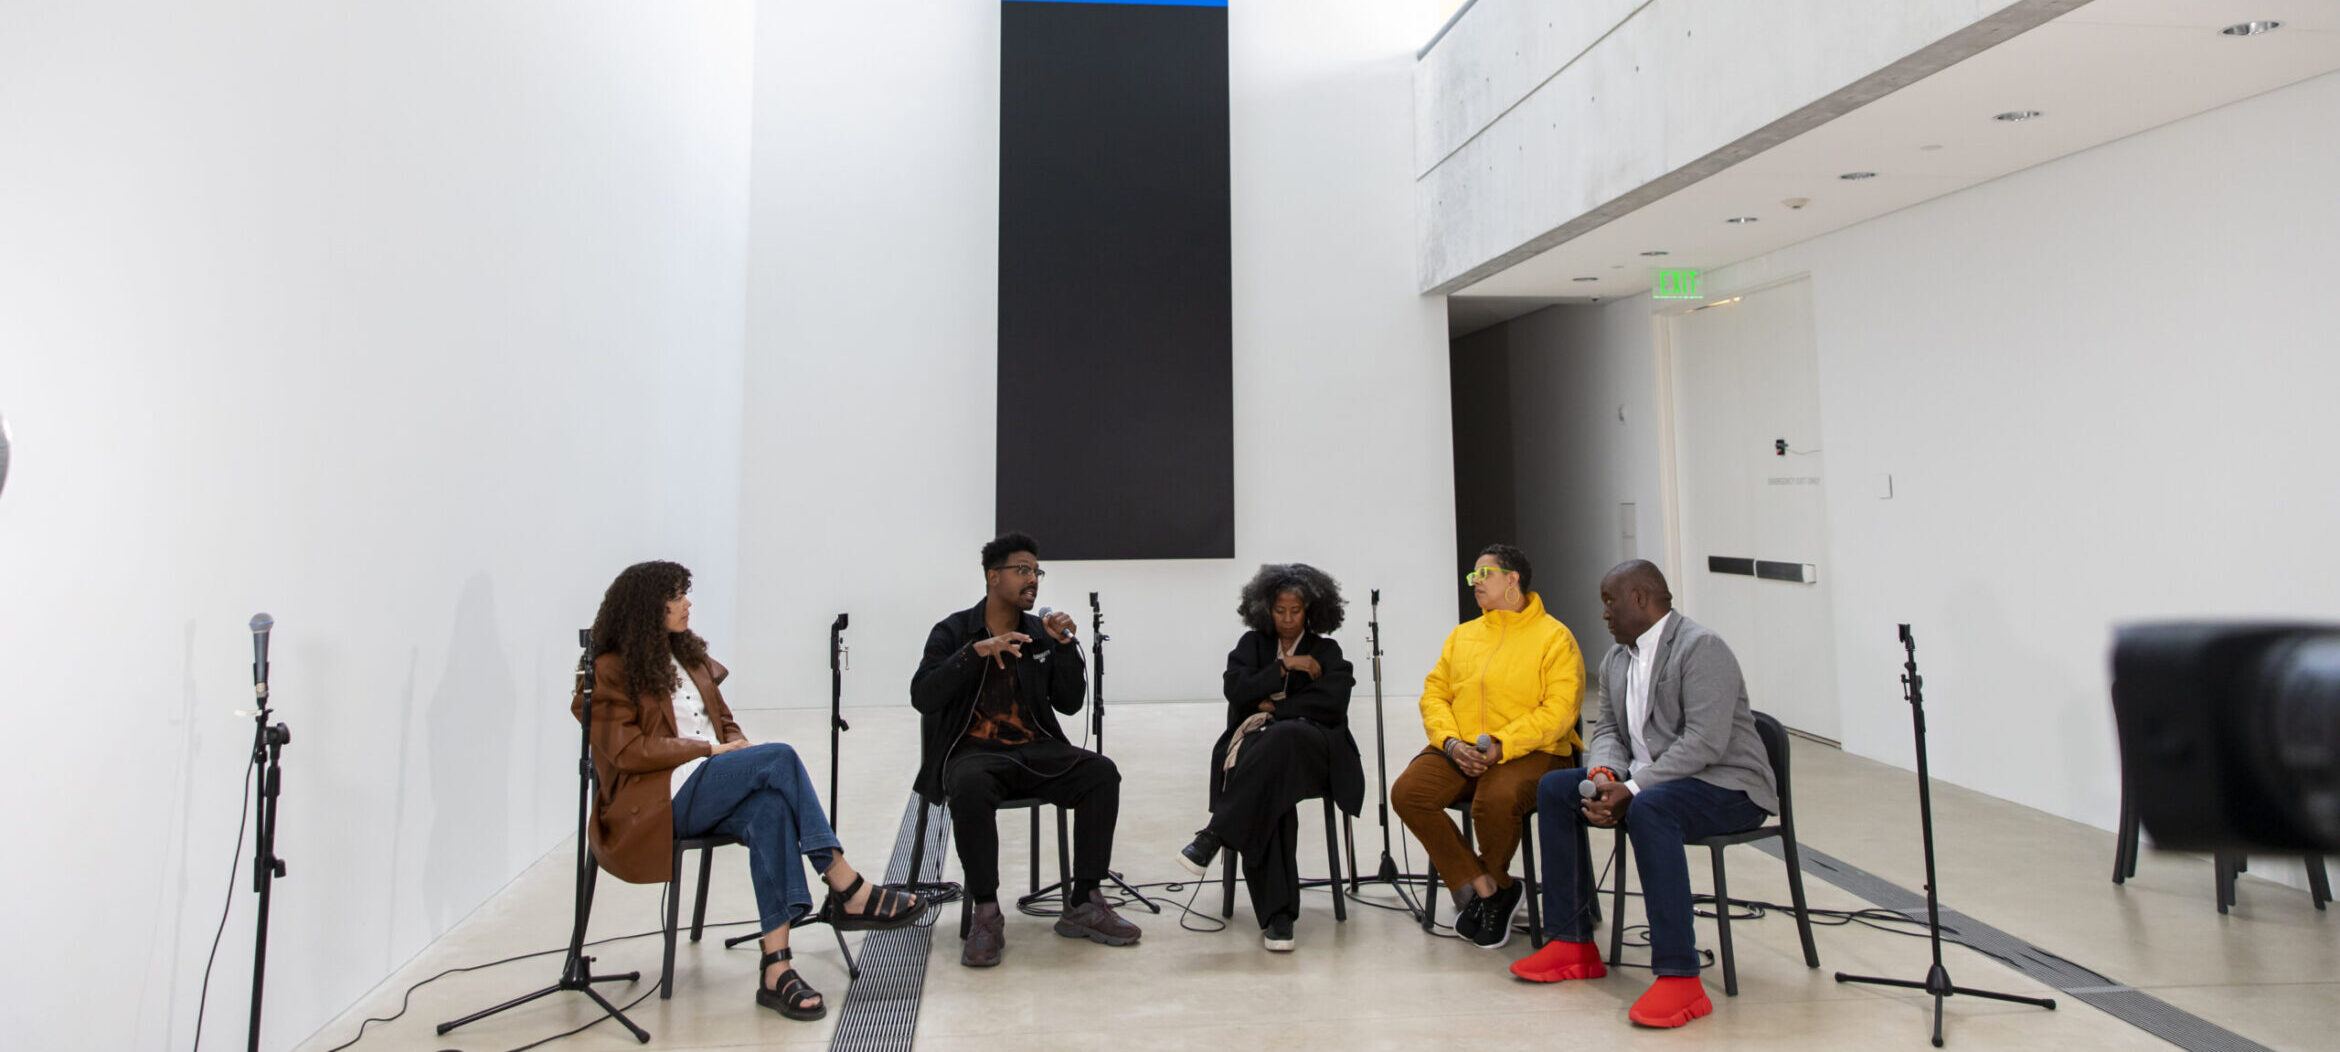 Artists and curators speaking at a roundtable discussion for Counterpublic 2023 in front of Ellsworth Kelly's large vertical blue and black painting.